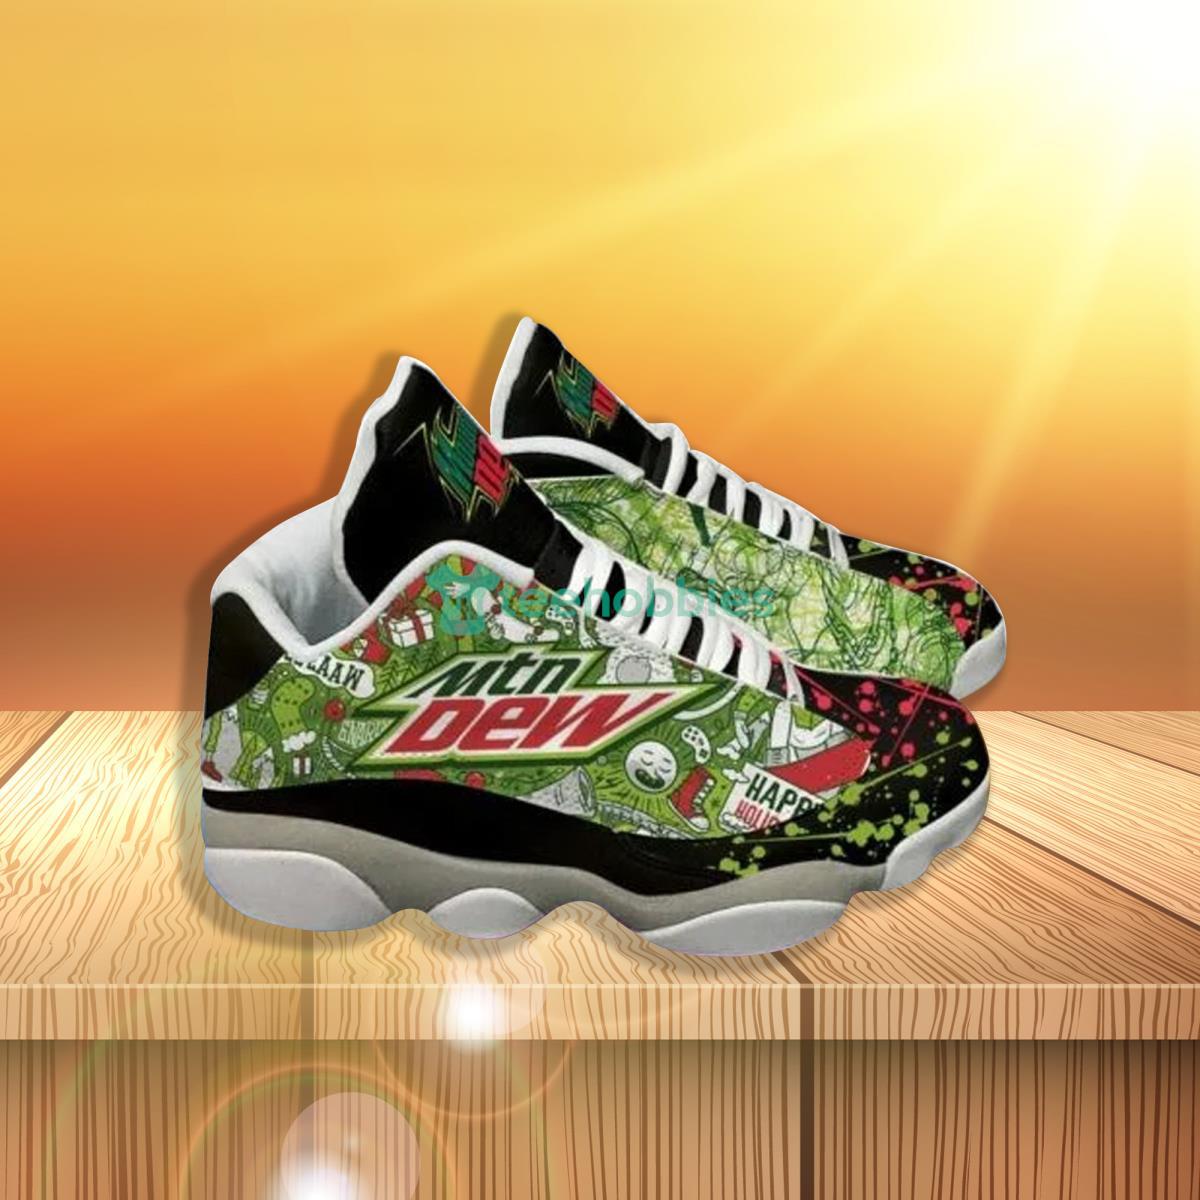 Mountain Dew Drink Air Jordan 13 Shoes Running Casual Sneakers Product Photo 1